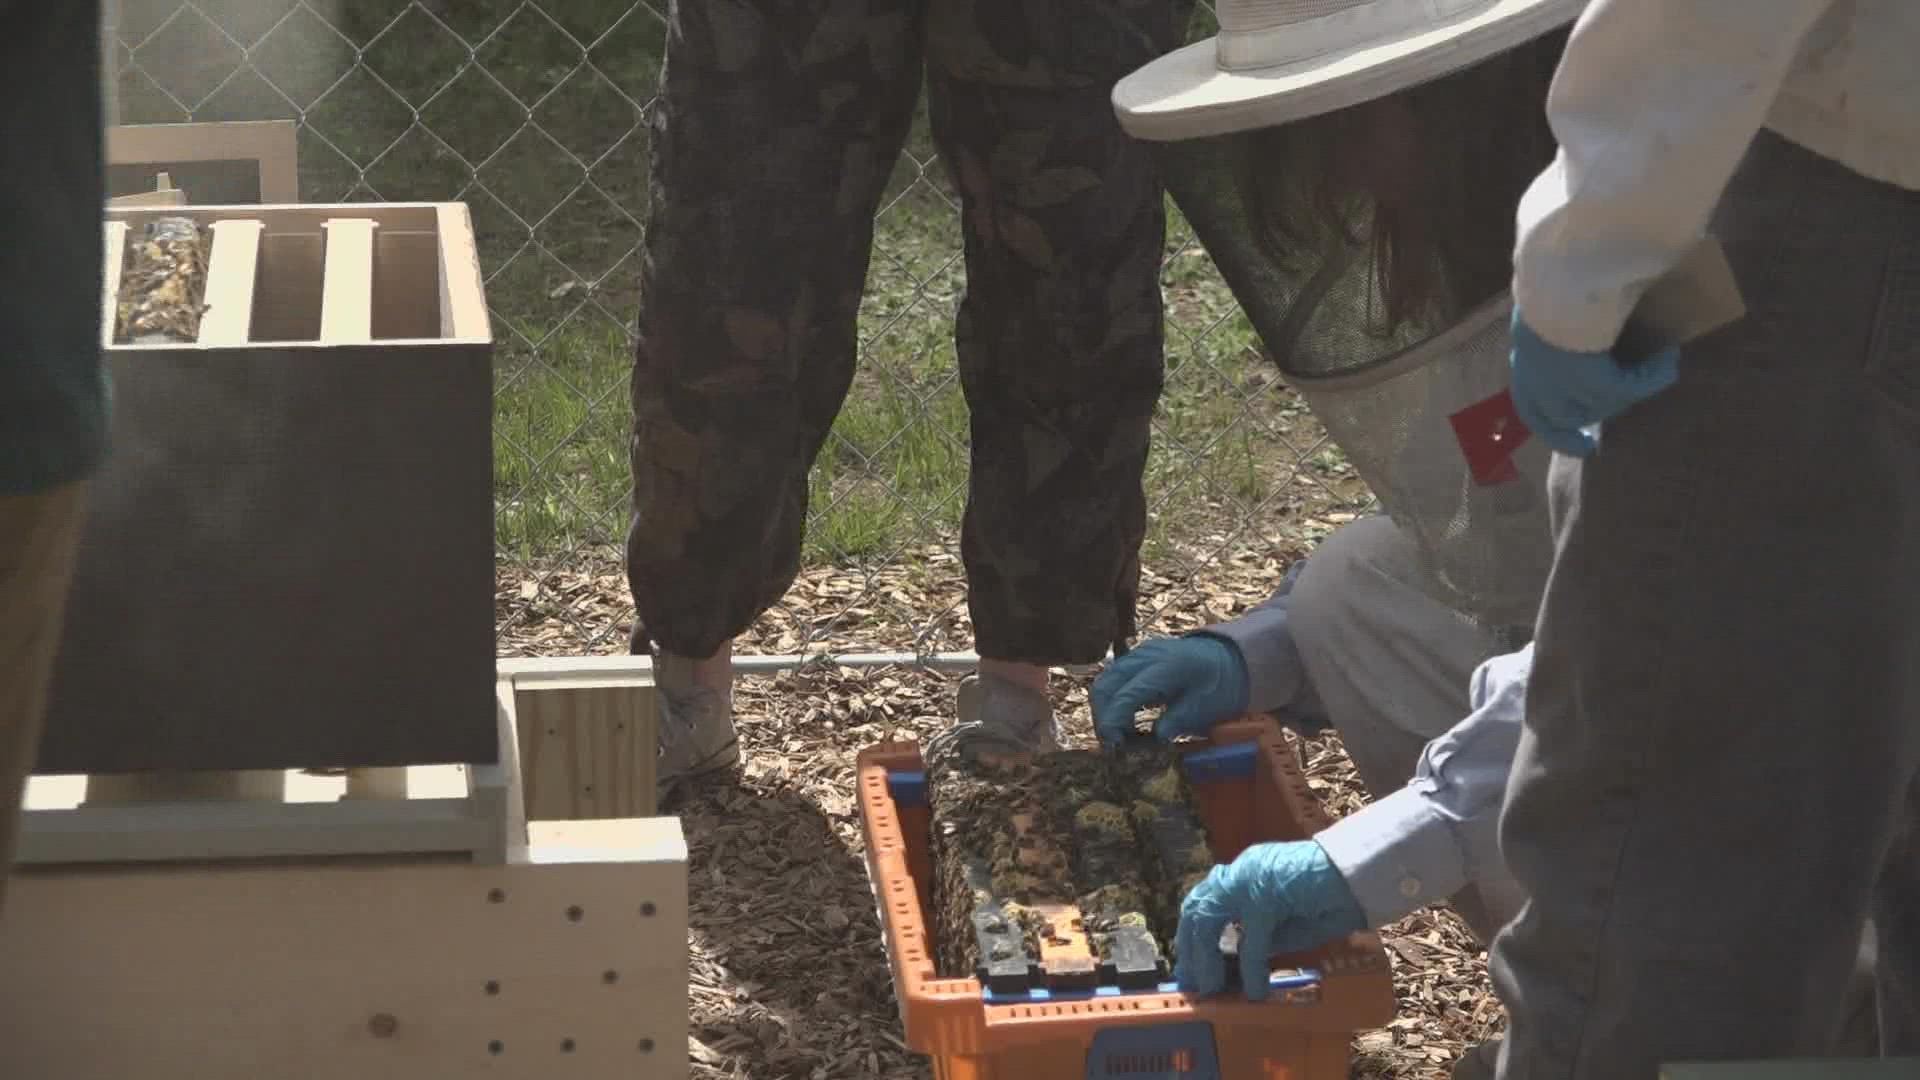 Students were certified as beekeepers last year, and the club is ready to train more.